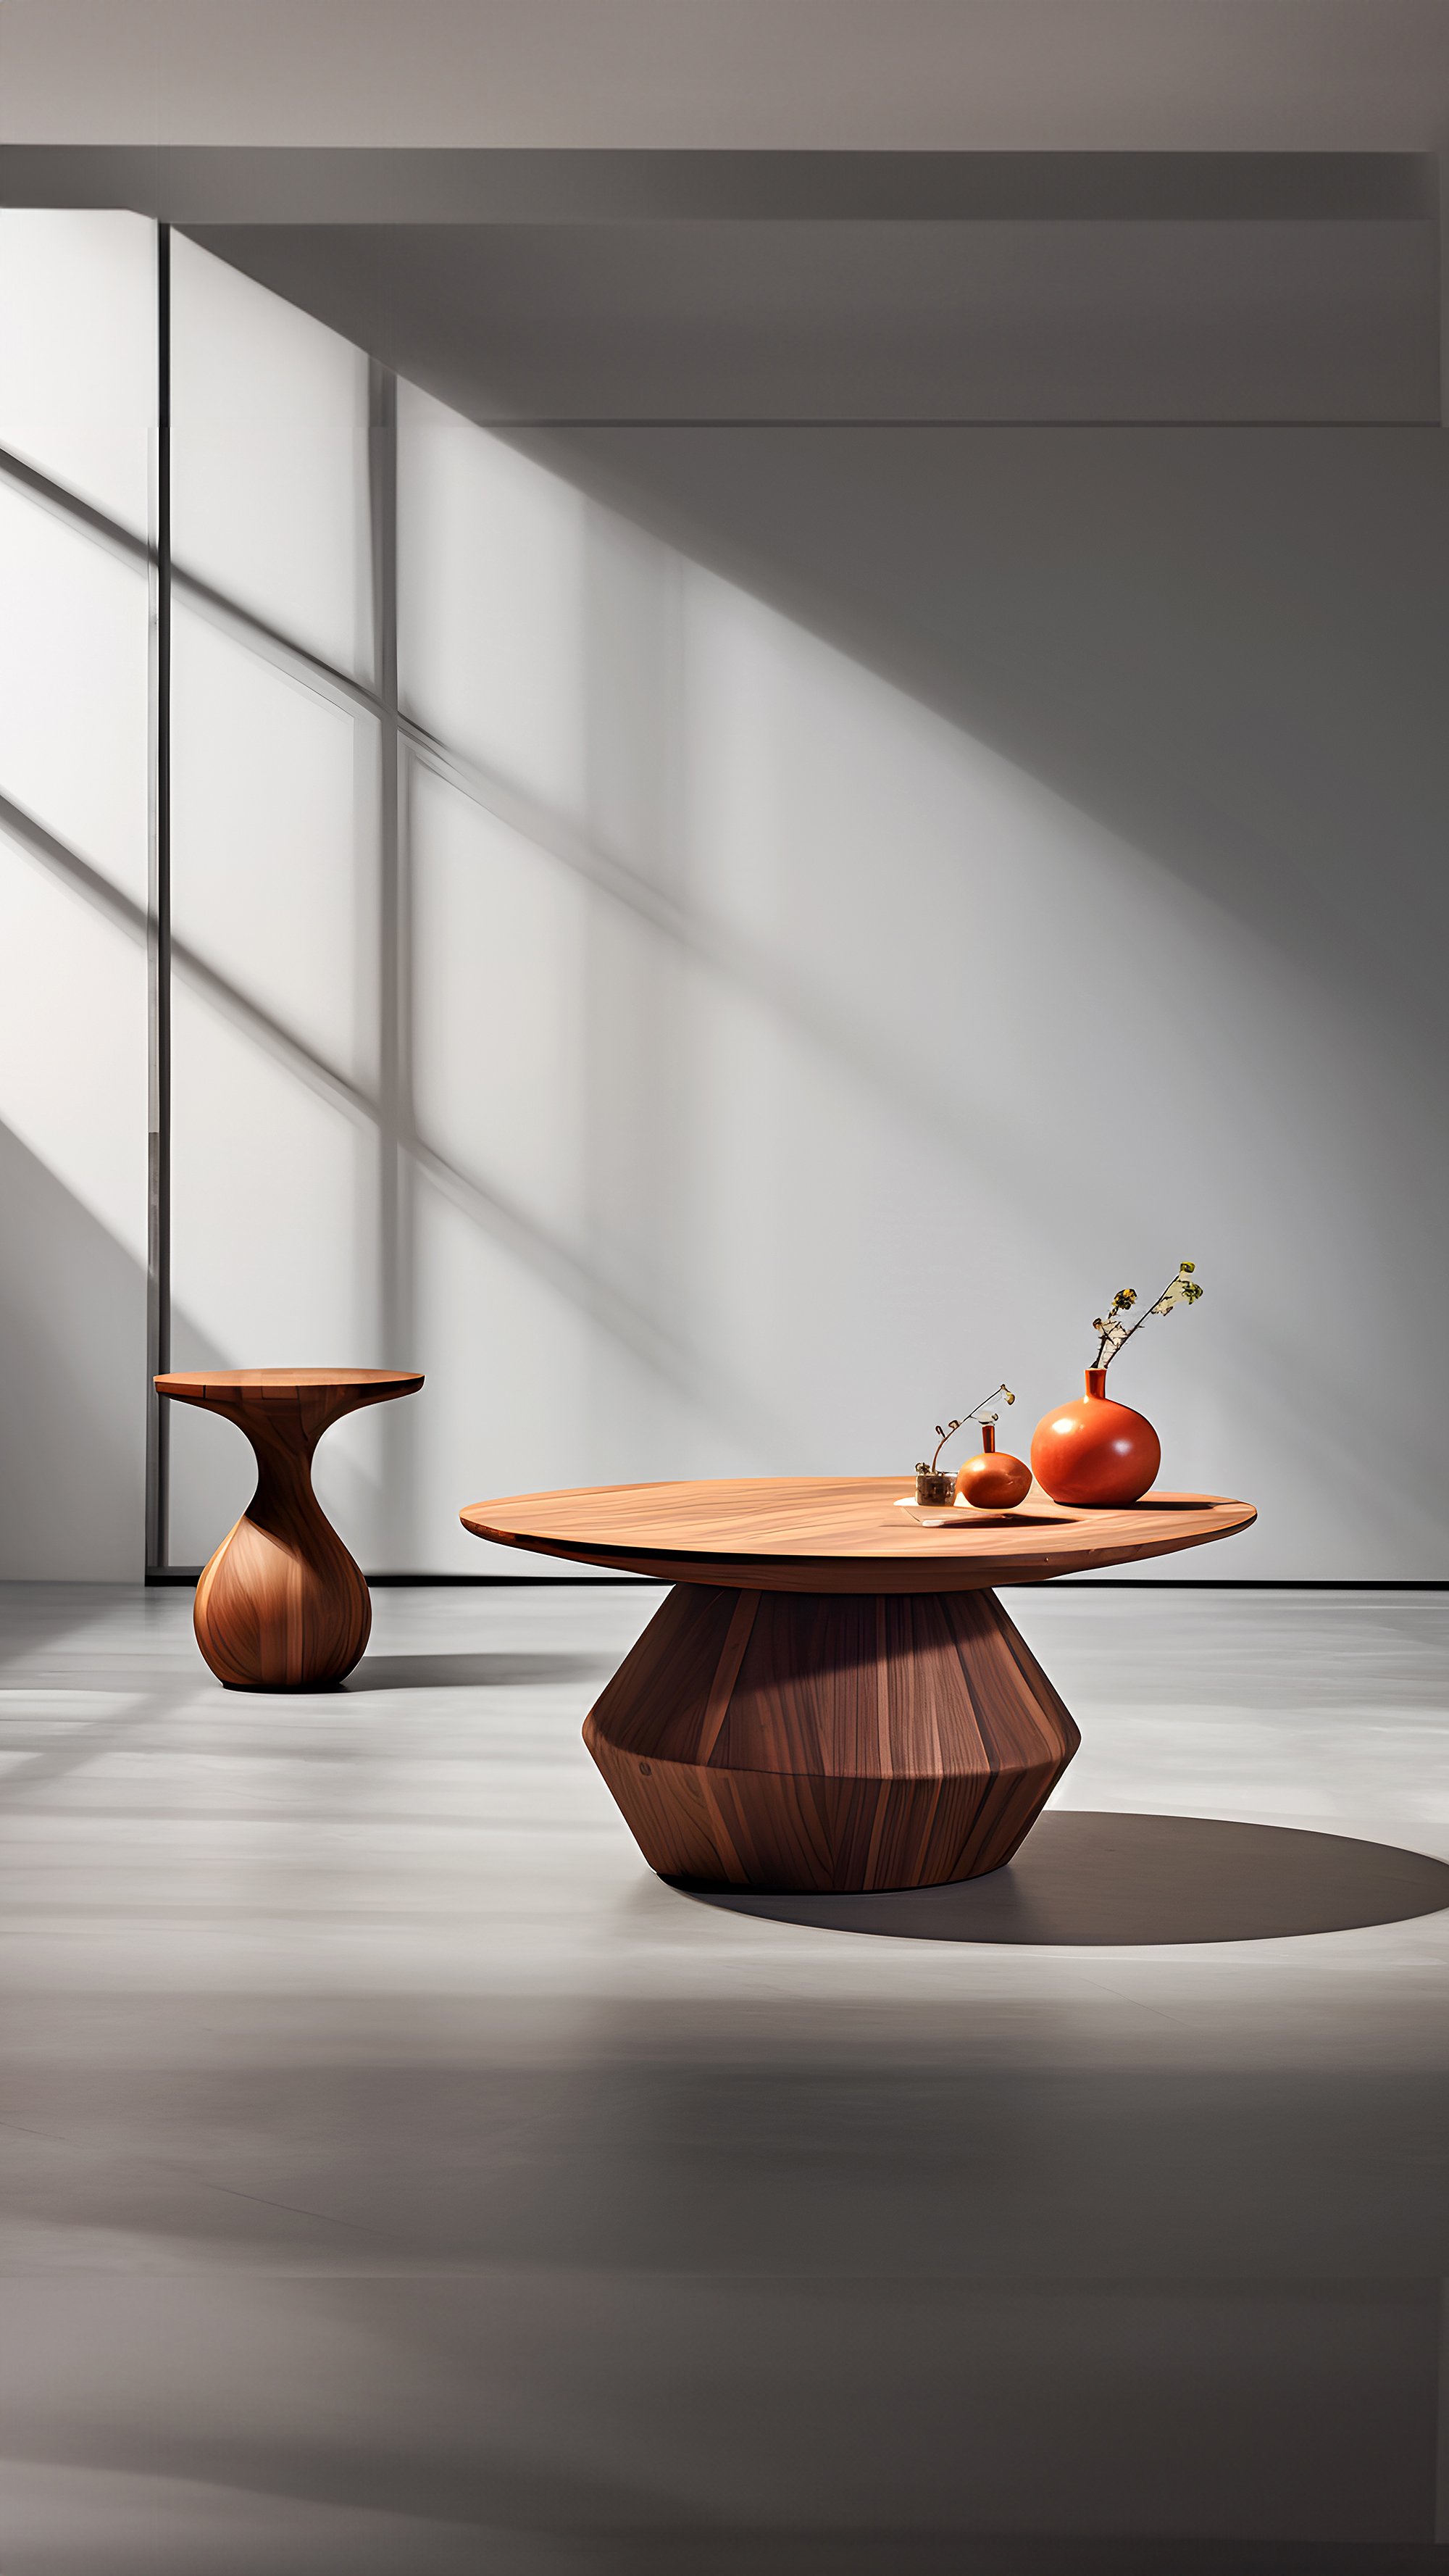 Sculptural Coffee Table Made of Solid Wood, Center Table Solace S41 by Joel Escalona — 7.jpg